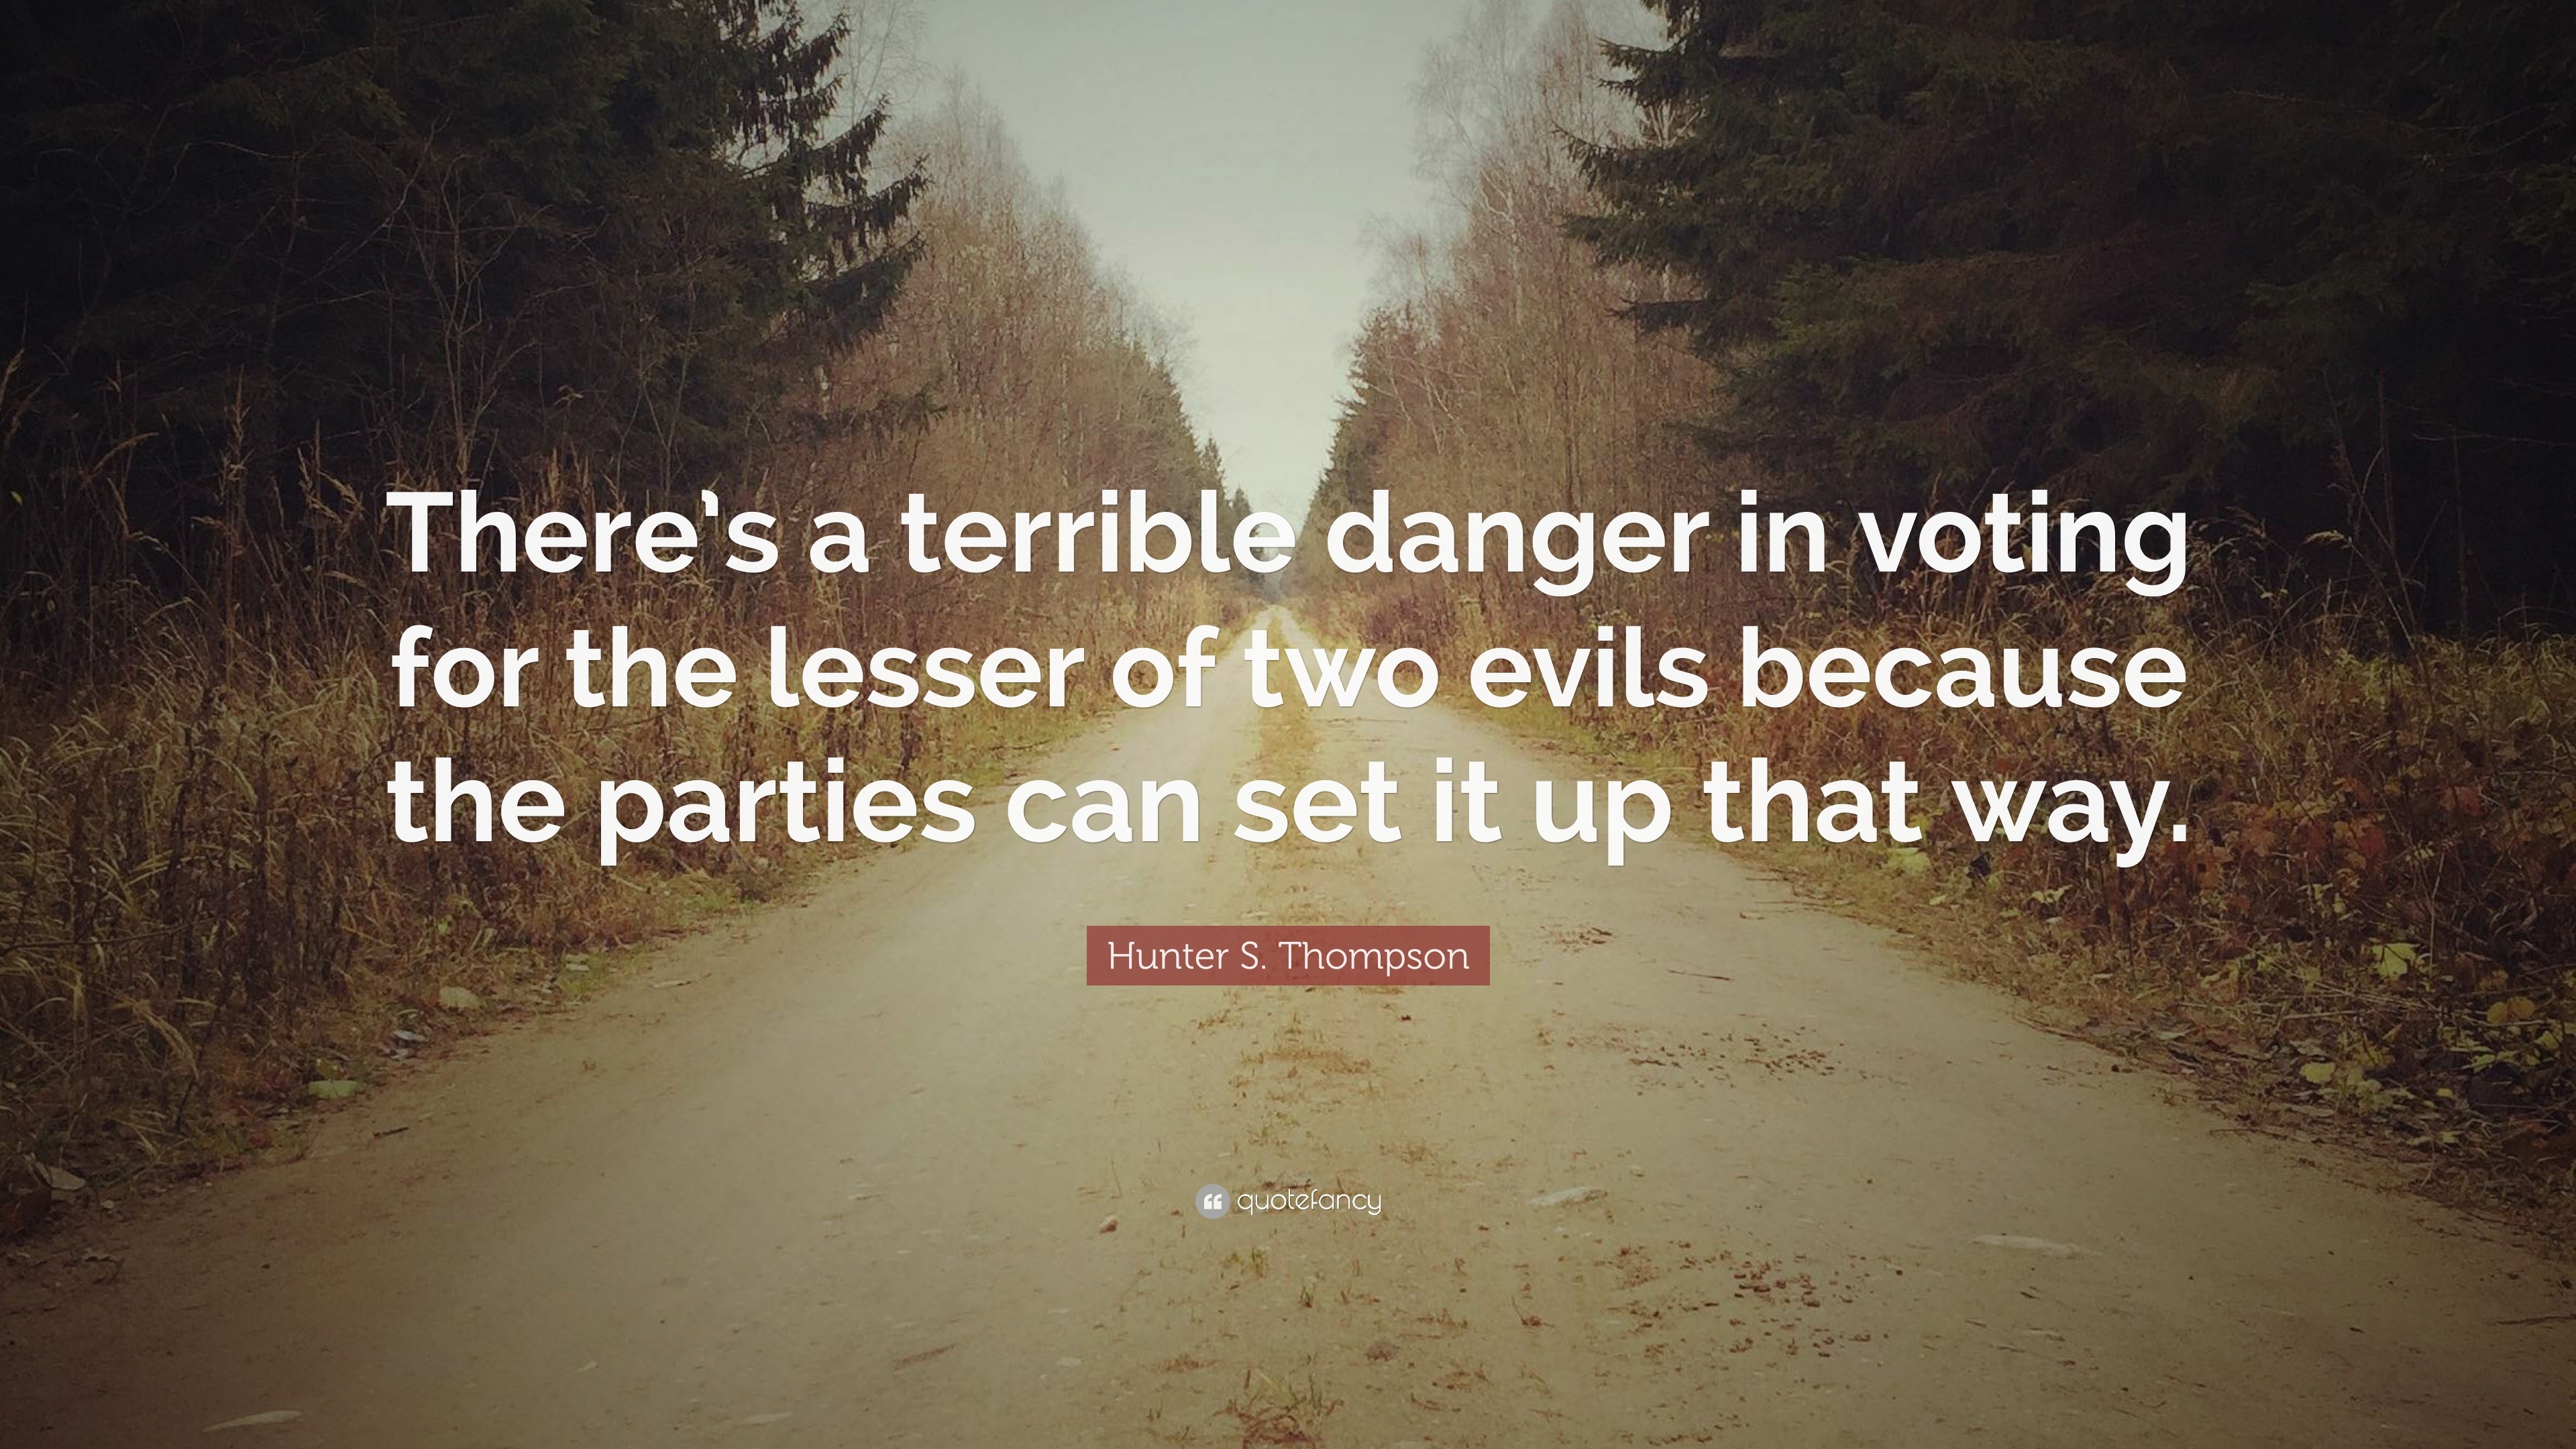 225260-Hunter-S-Thompson-Quote-There-s-a-terrible-danger-in-voting-for.jpg